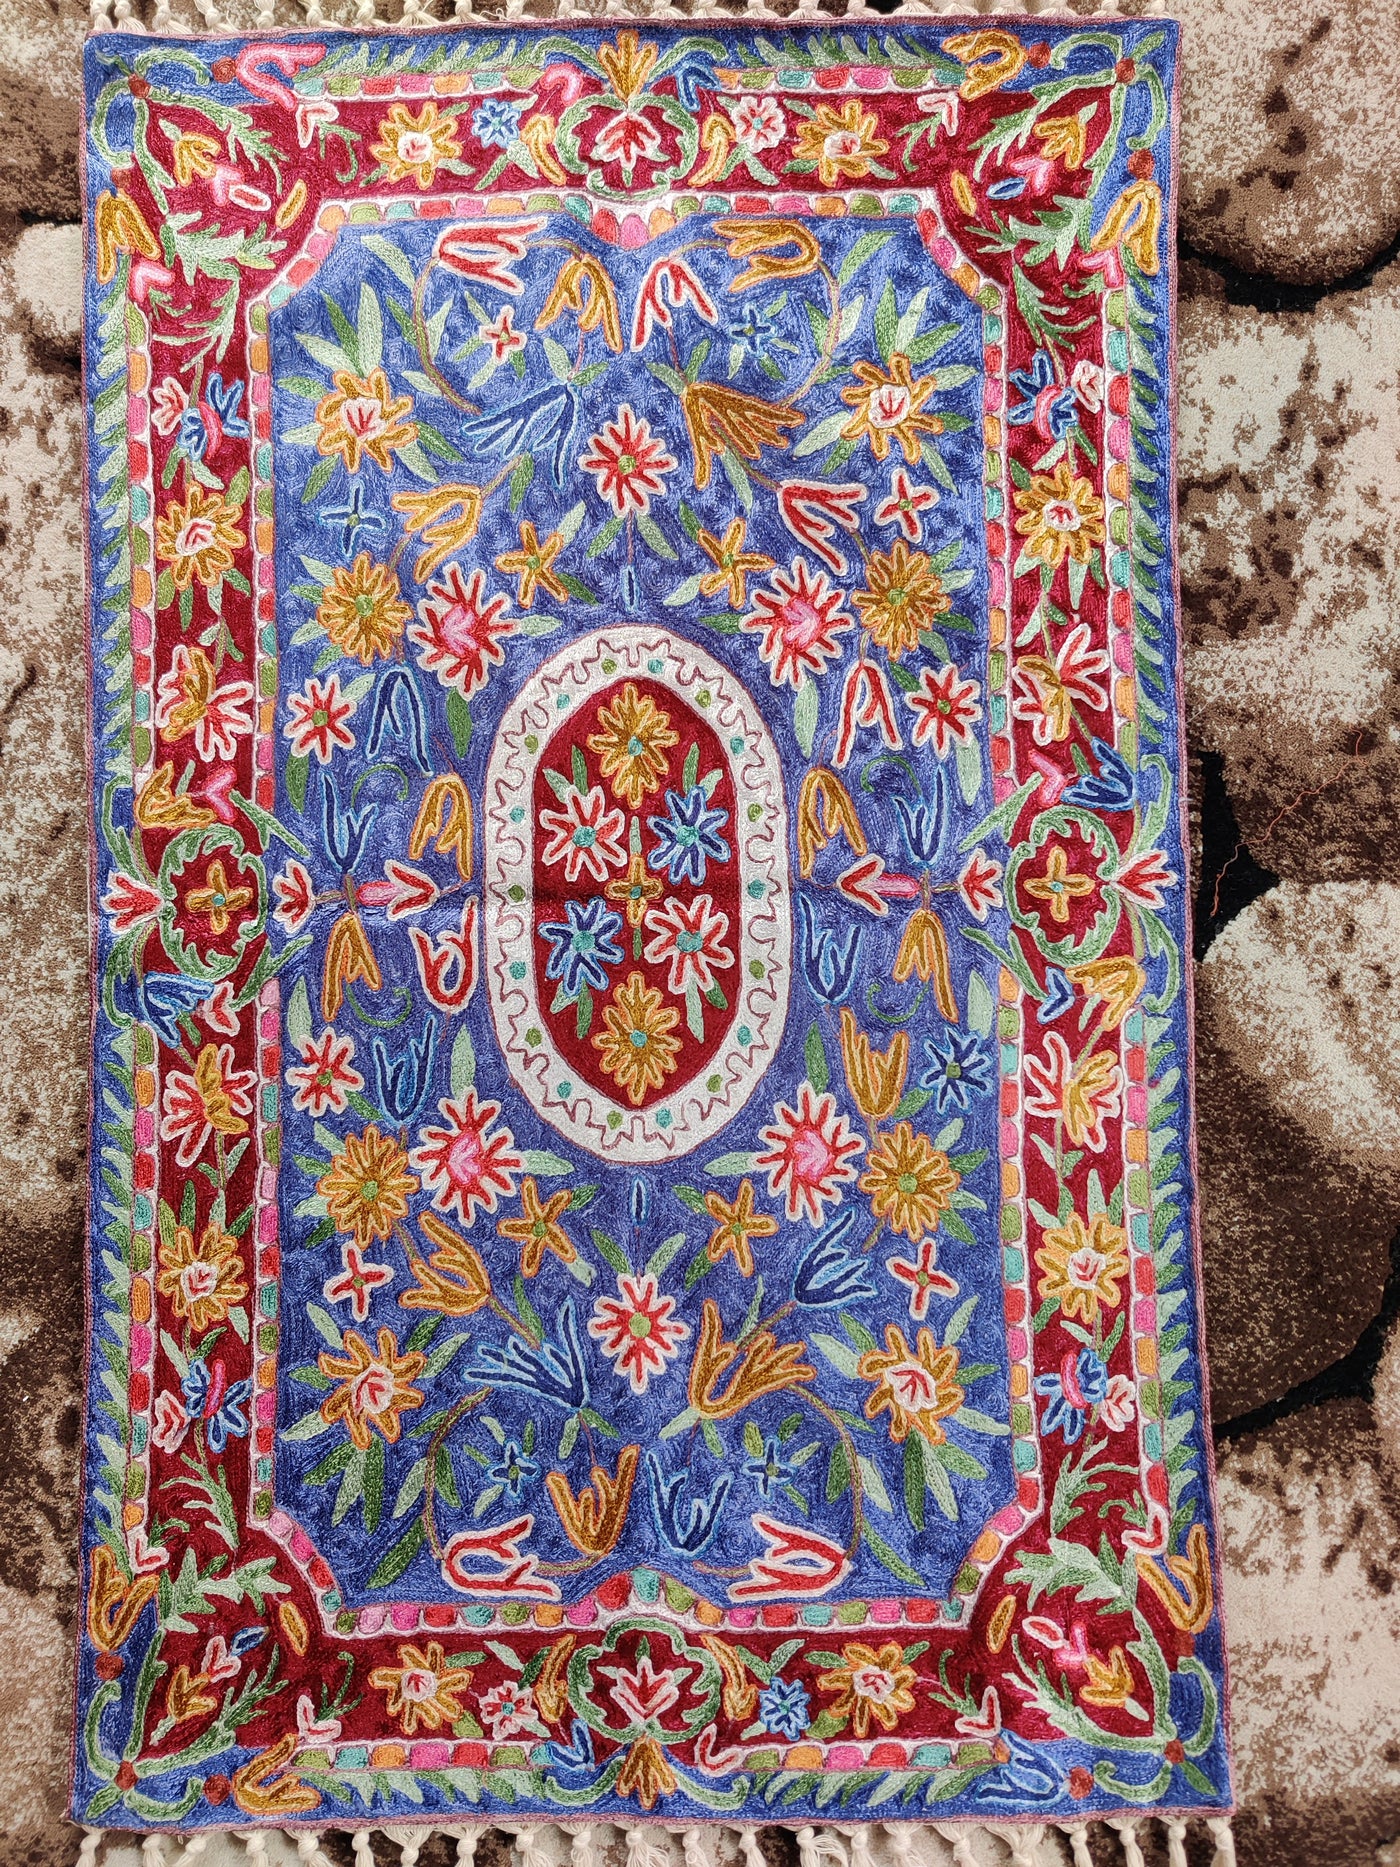 Artistry in Every Stitch: Hand-Aari Embroidered Rug 3 x 2